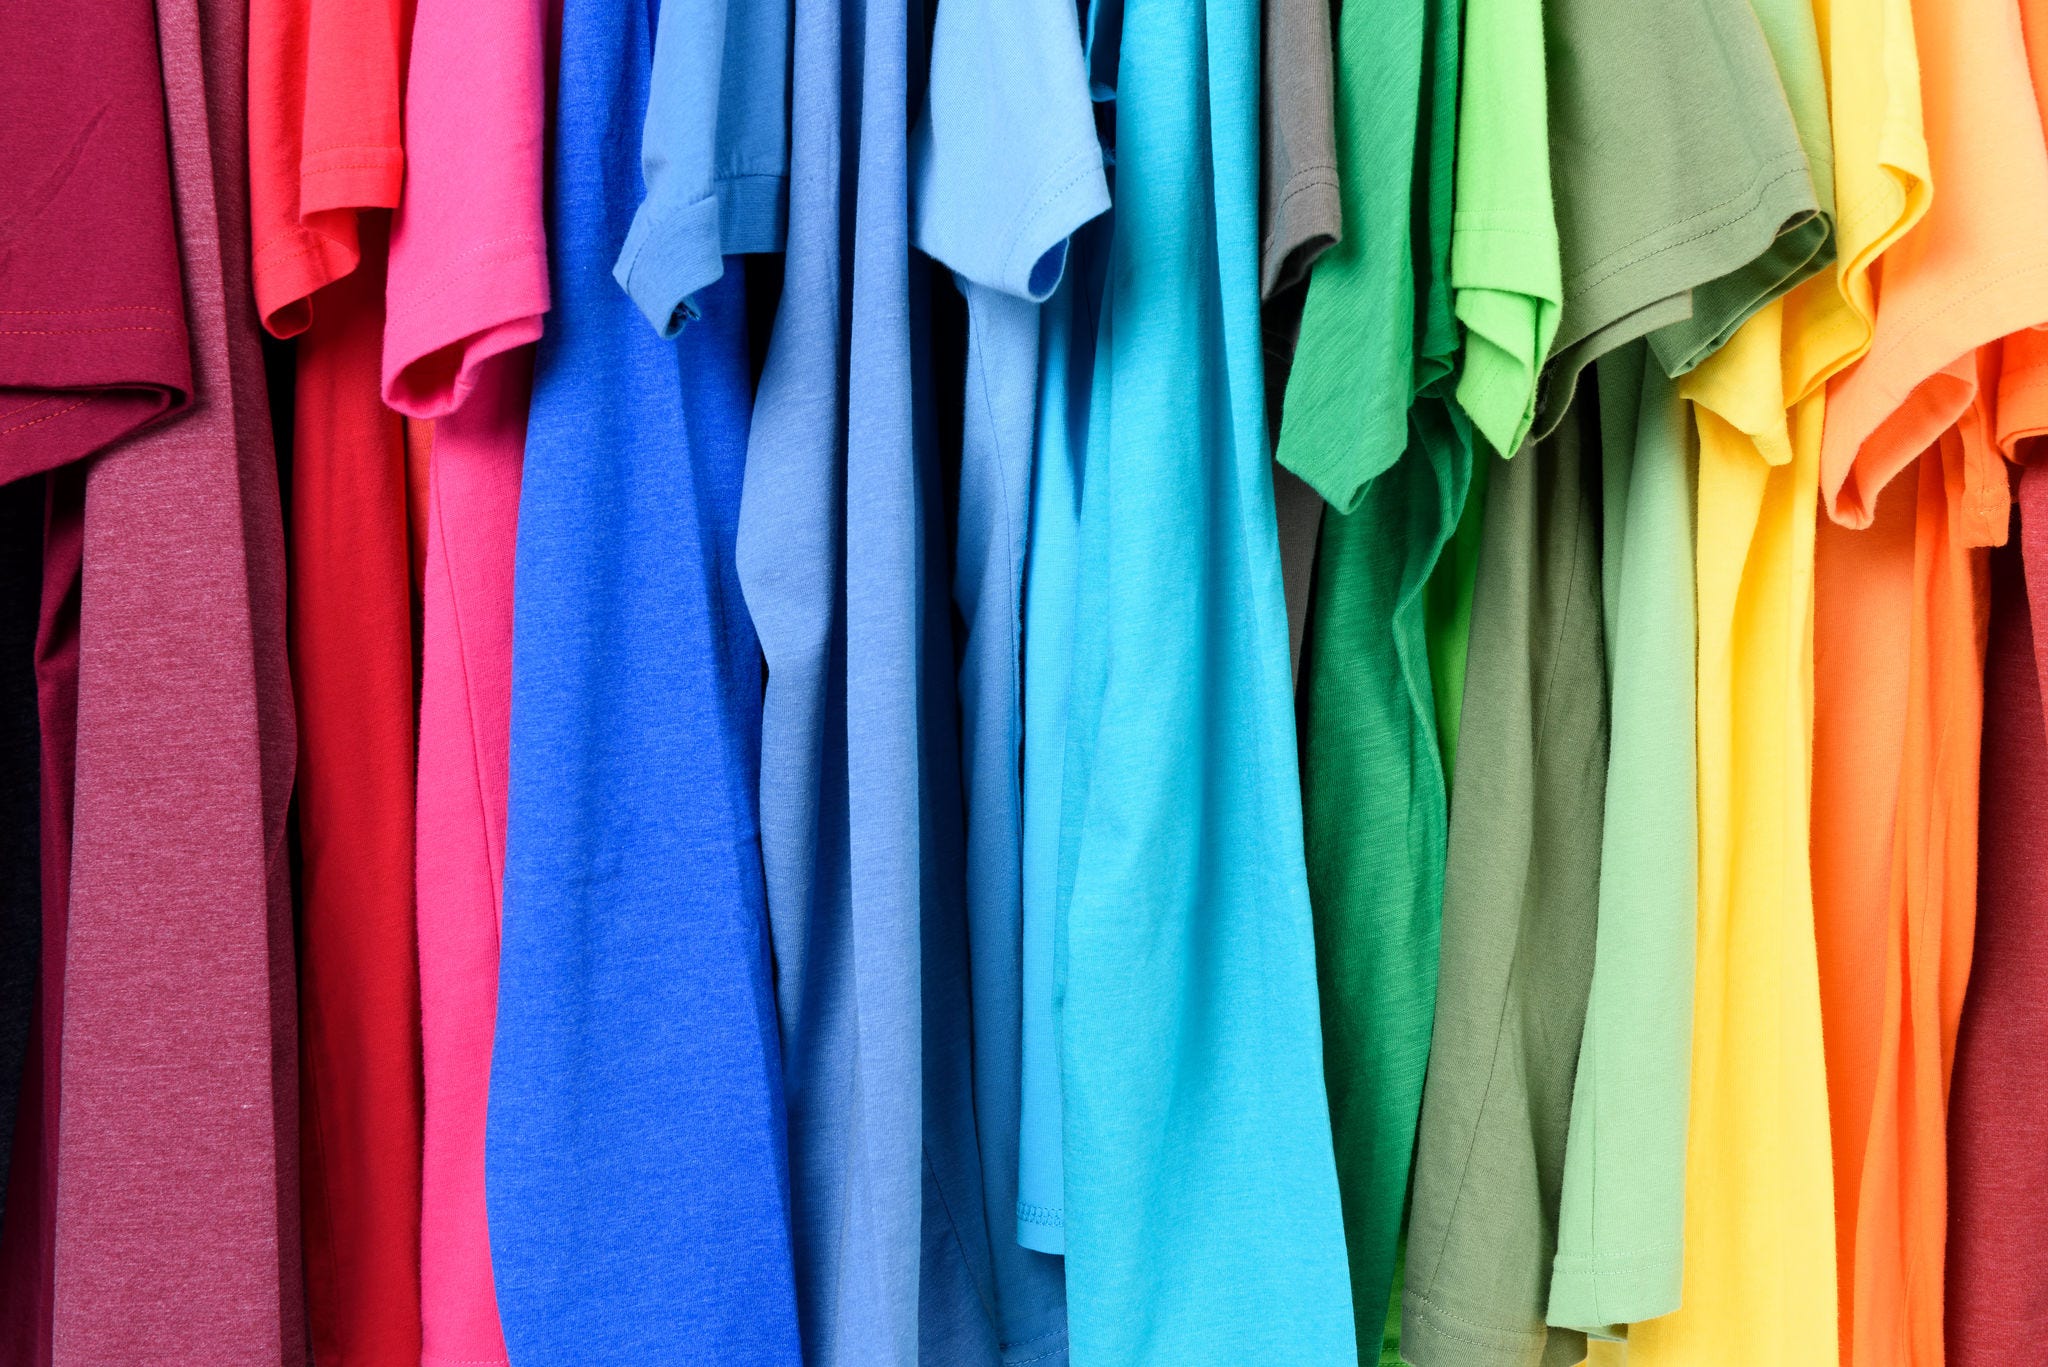 Close up photograph of colorful tshirts